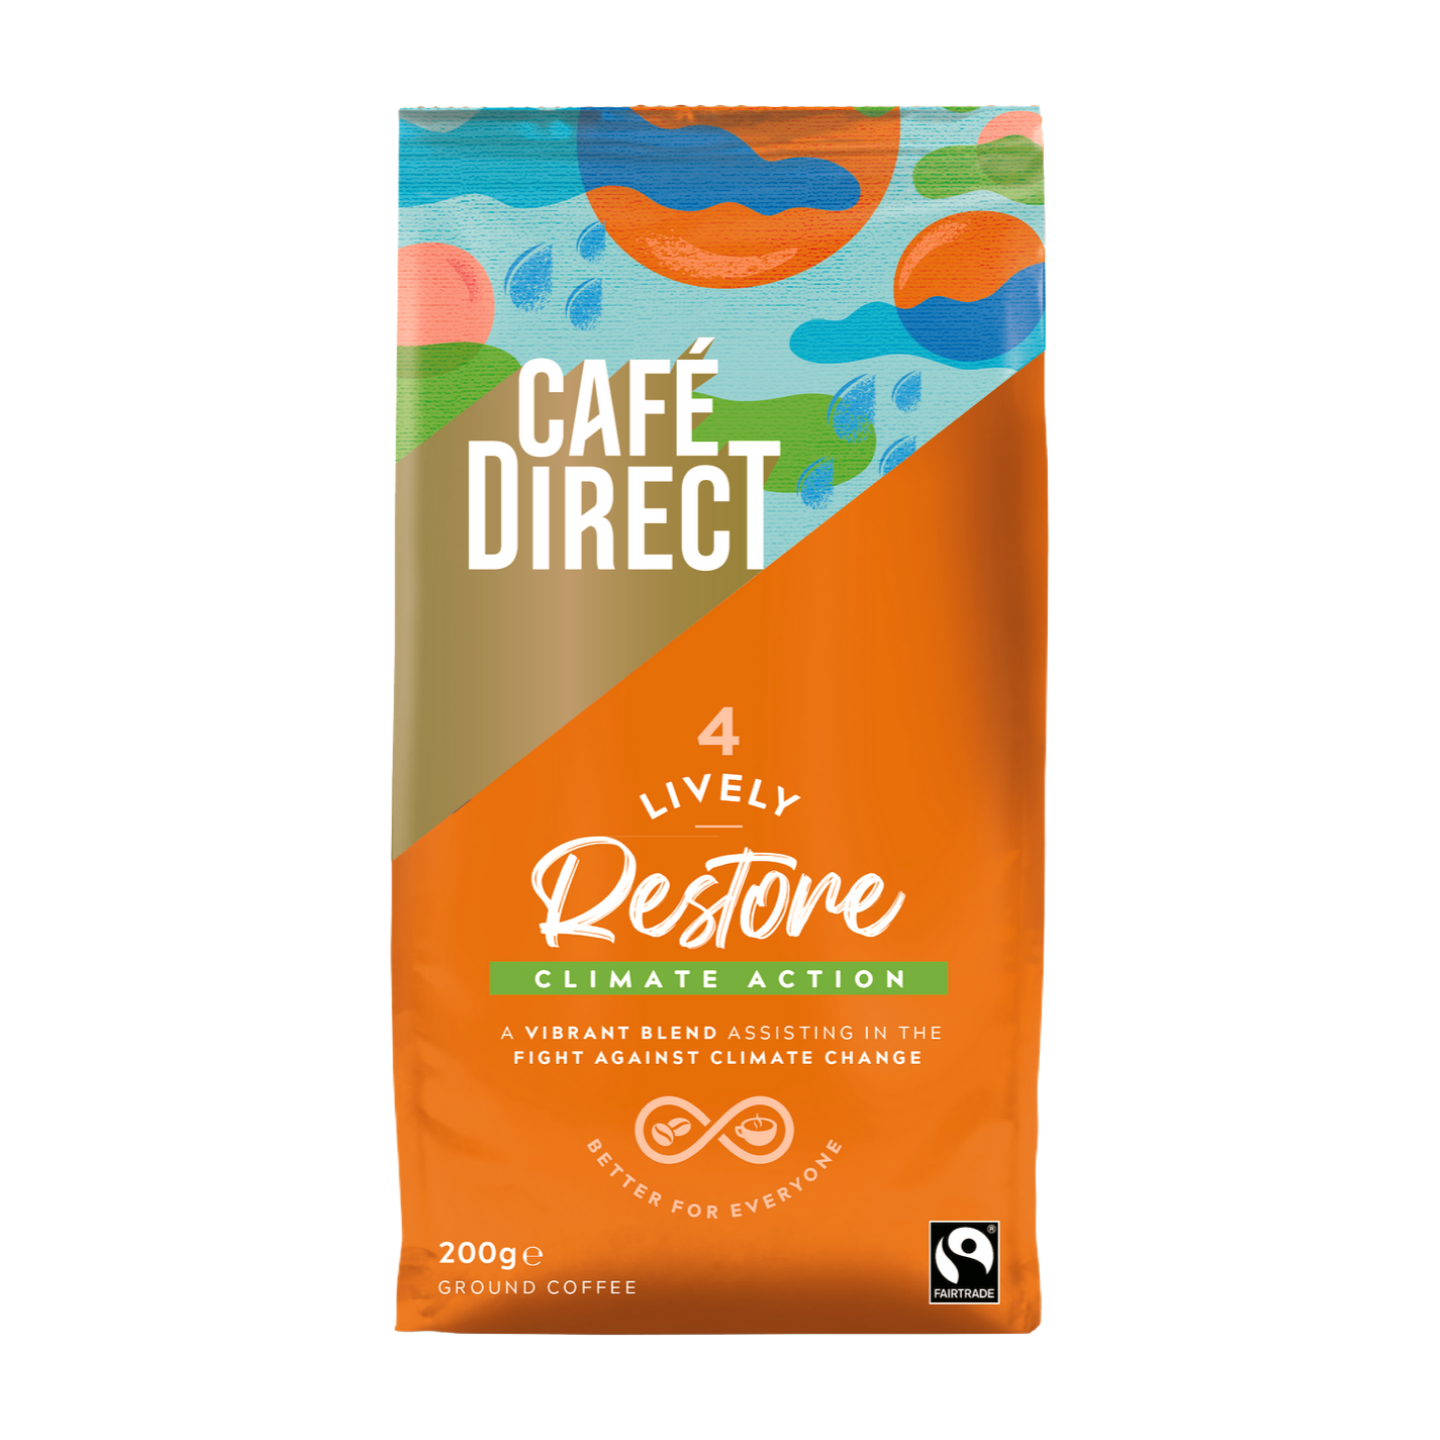 Cafe Direct Lively Roast Ground Coffee (6x200g)